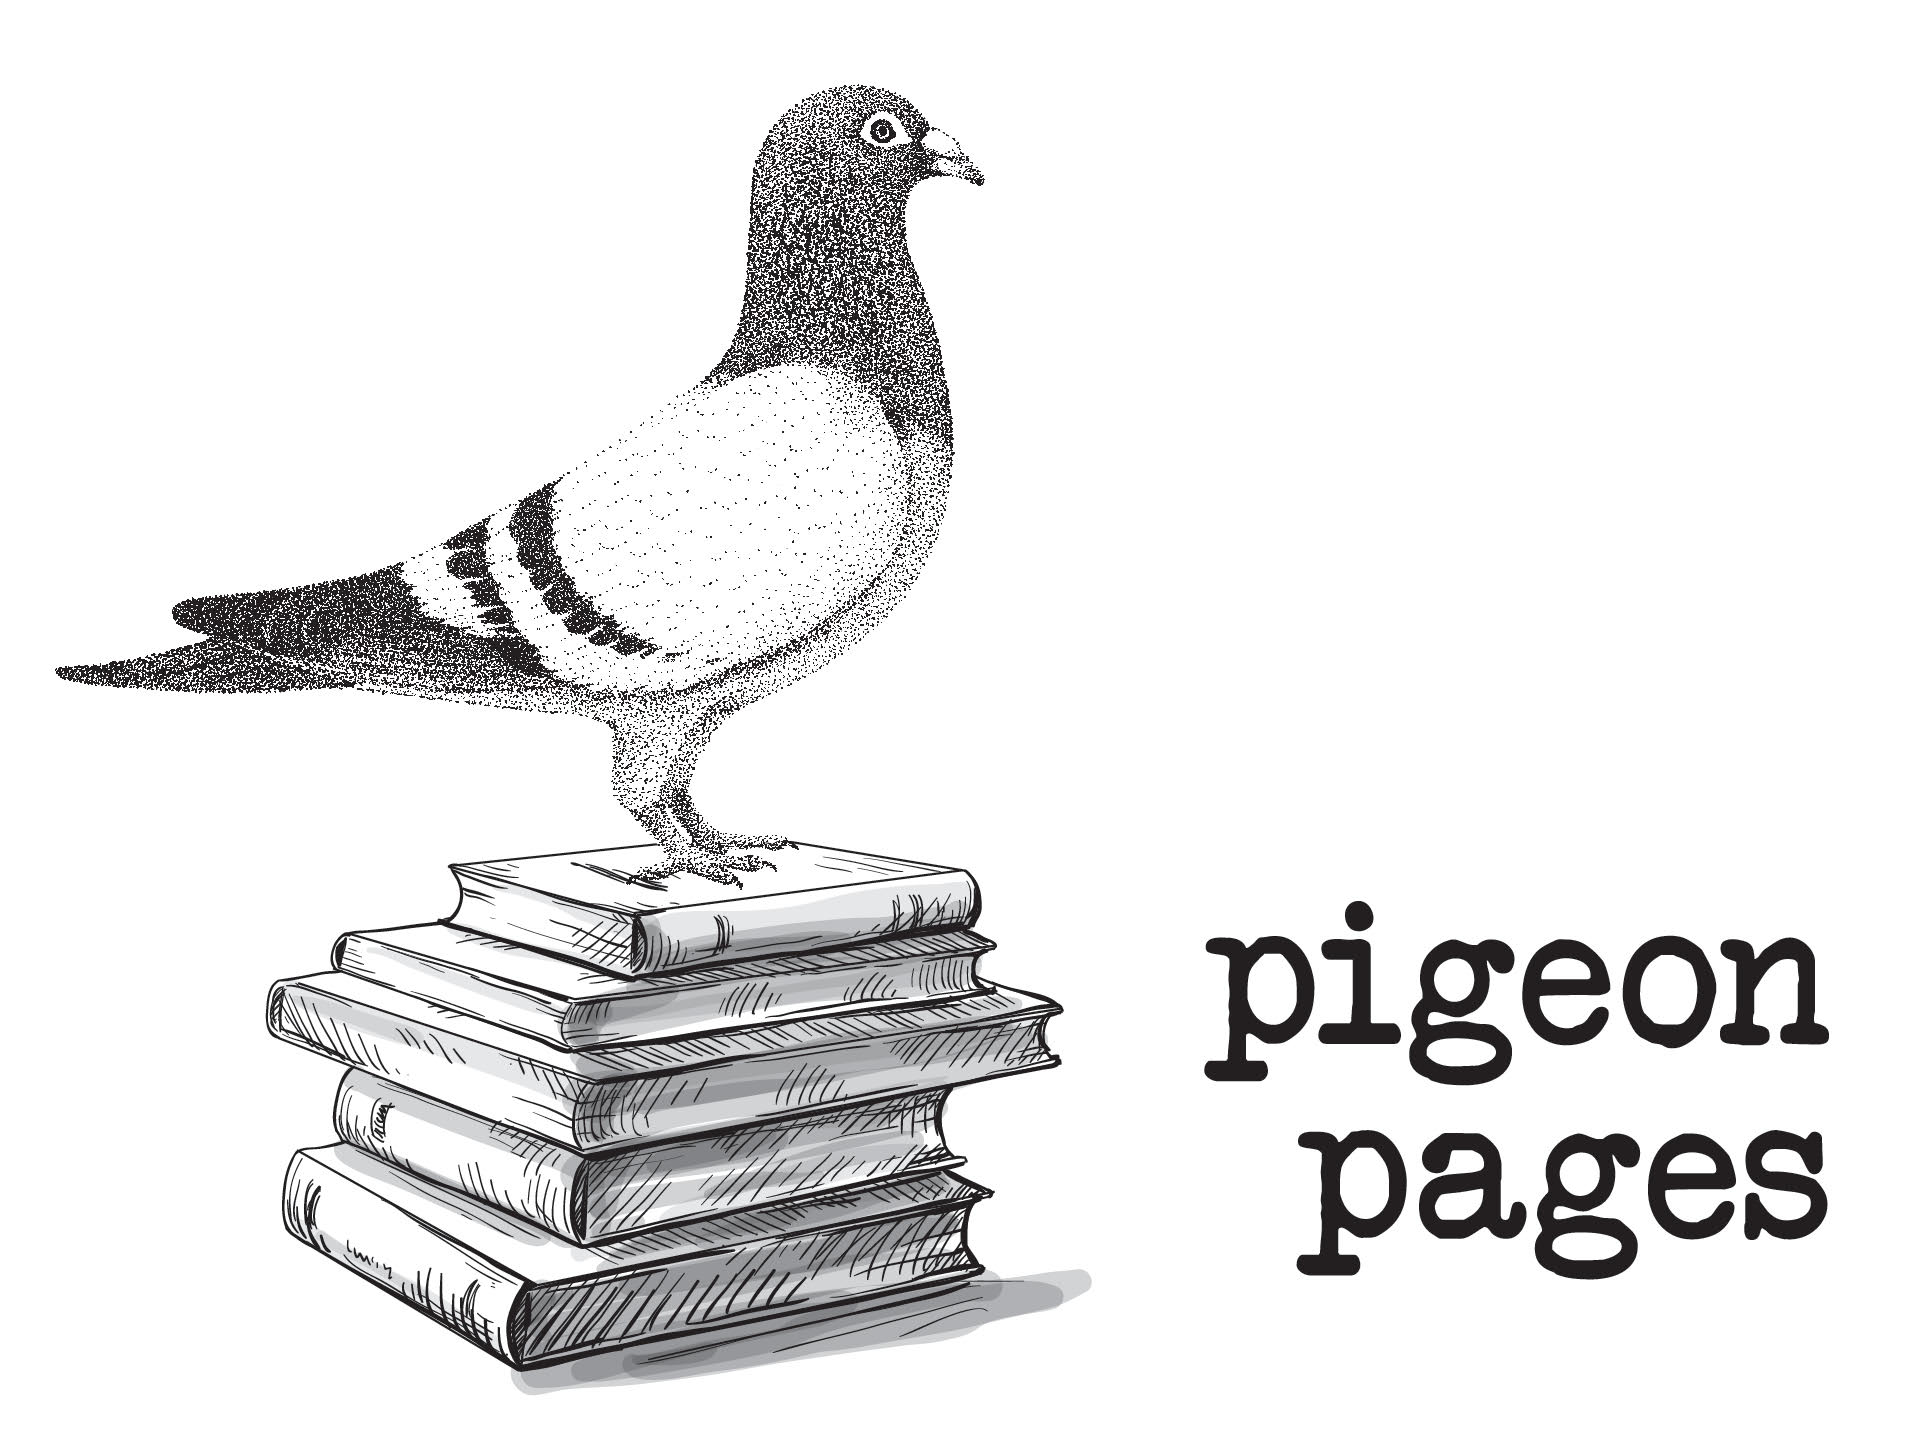 Pigeon Pages Literary Reading: Featuring Elissa Schappell, Joanna Scutts, Justine Champine, Marisa Siegel, and Amanda Claire Buckley- Hosted by Alisson Wood